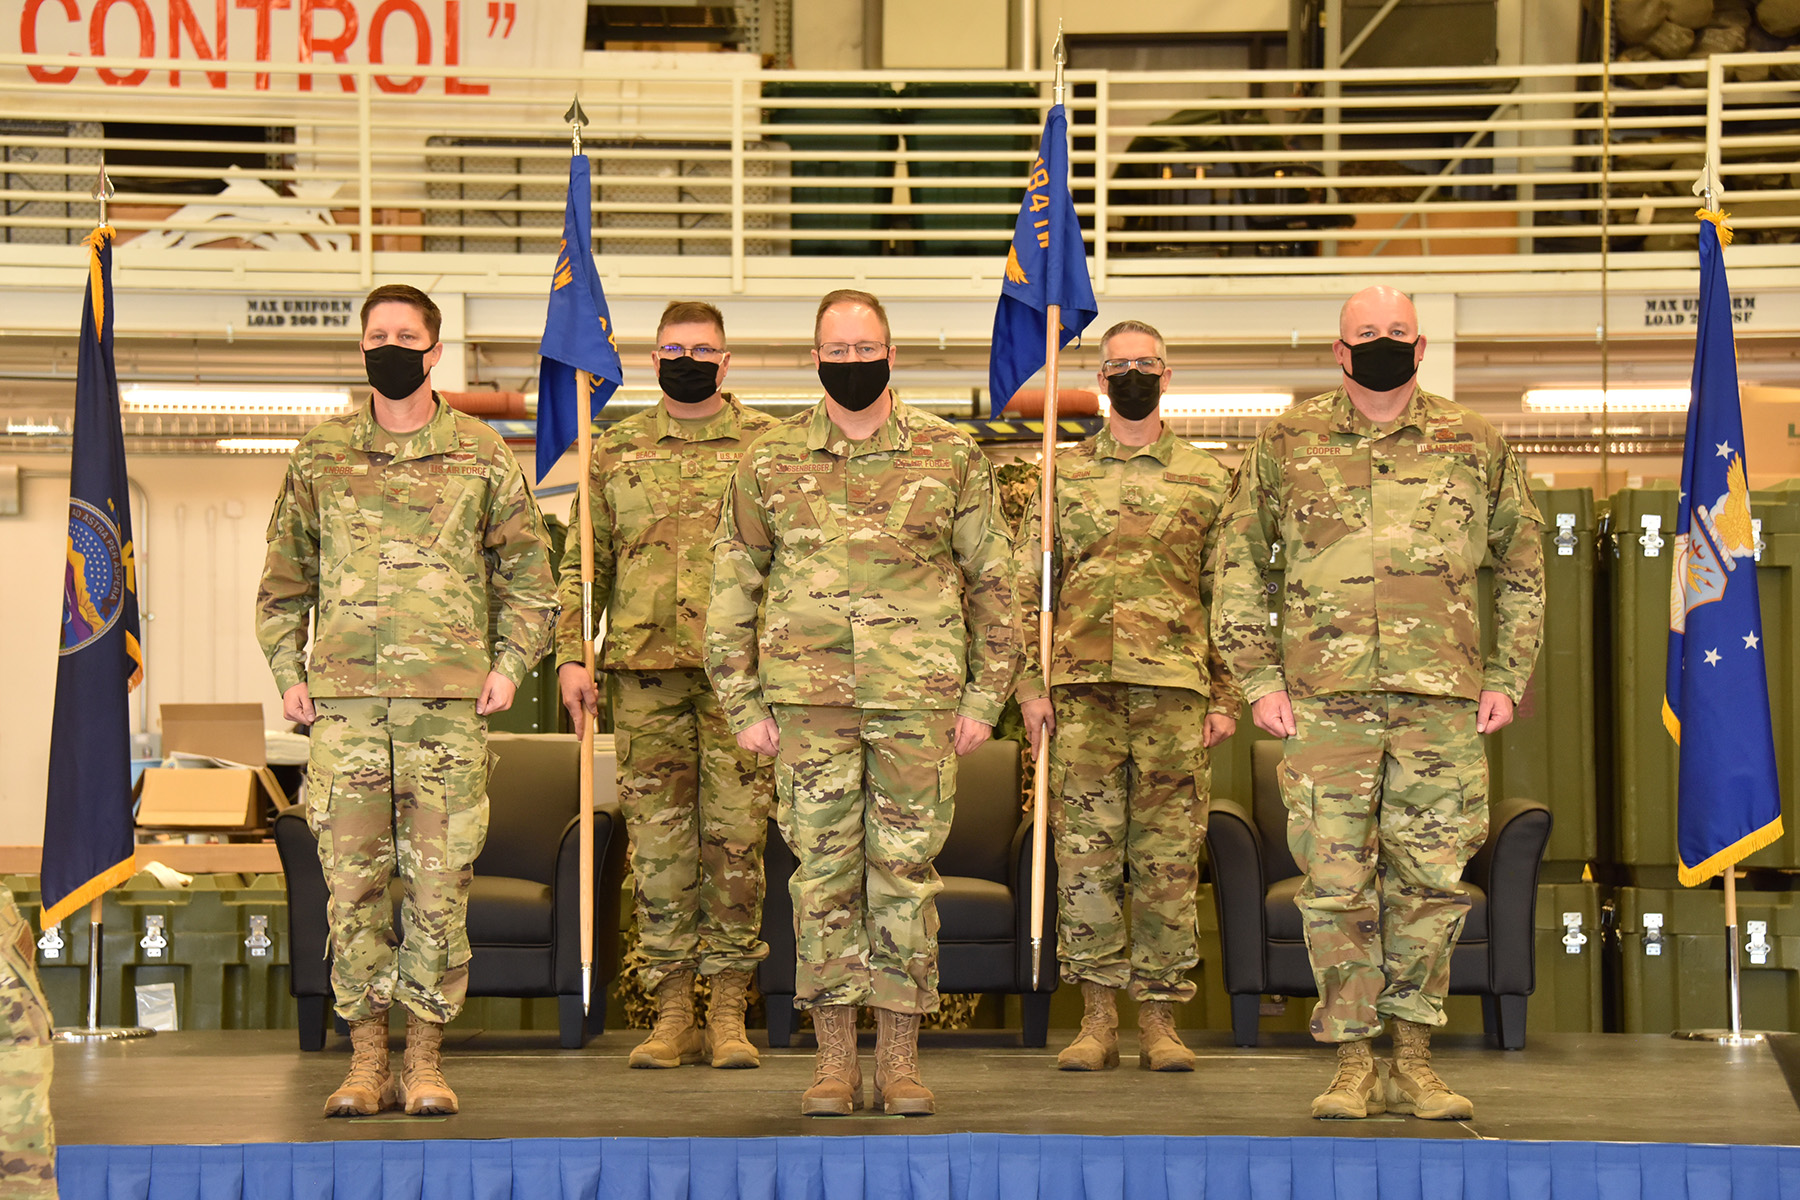 184th Mission Support Group and 184th Regional Support Group changes of command ceremony at McConnell Air Force Base, Kansas, March 6, 2021.